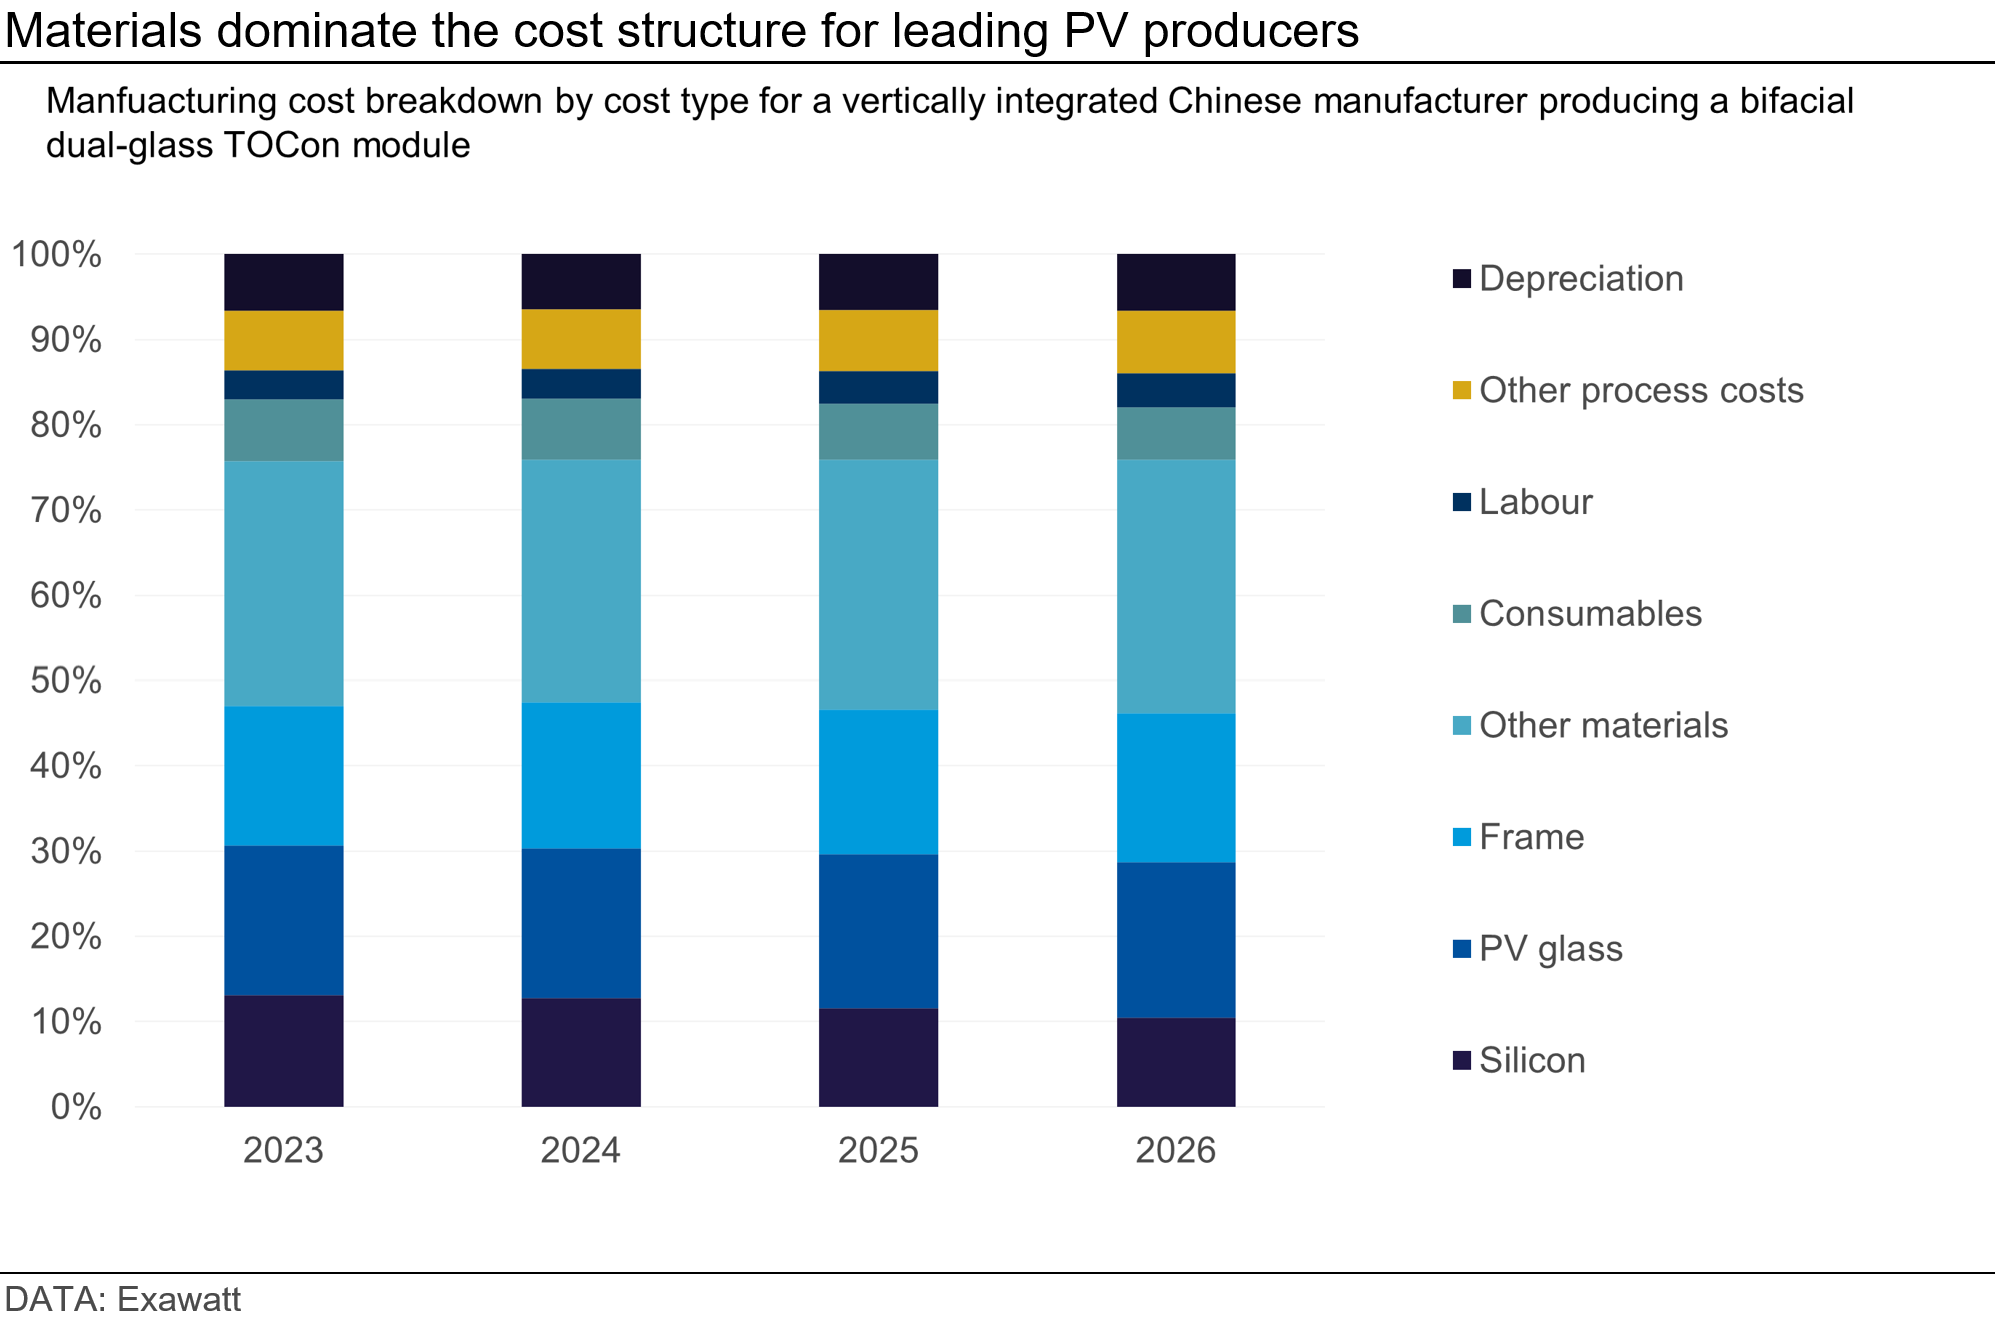 Graph showing that materials dominate the cost structure for leading PV producers